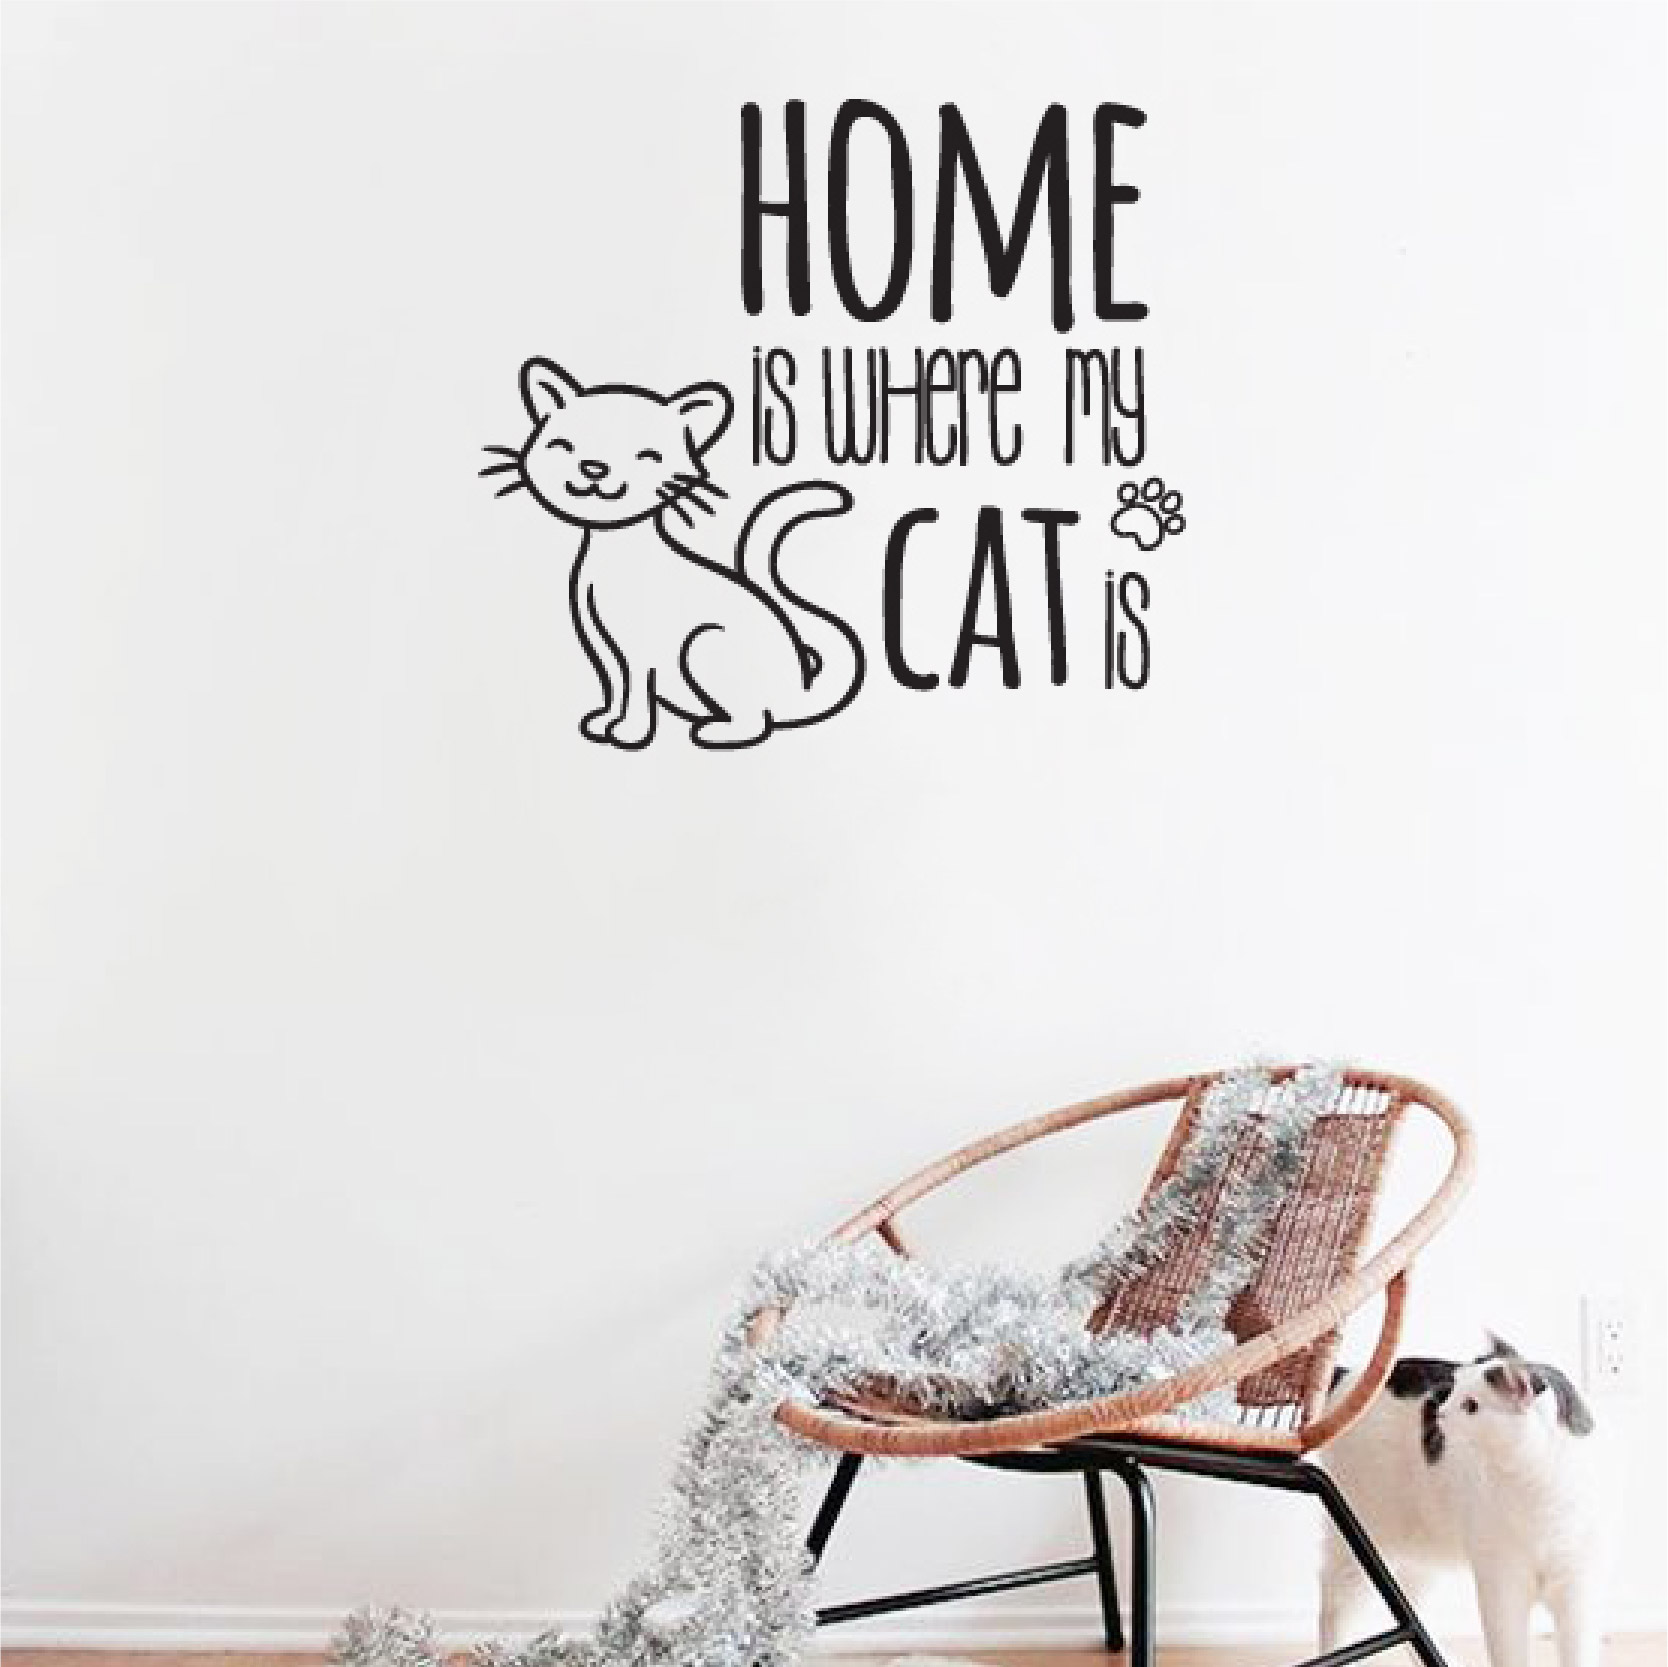 Home is where my cat is - branco